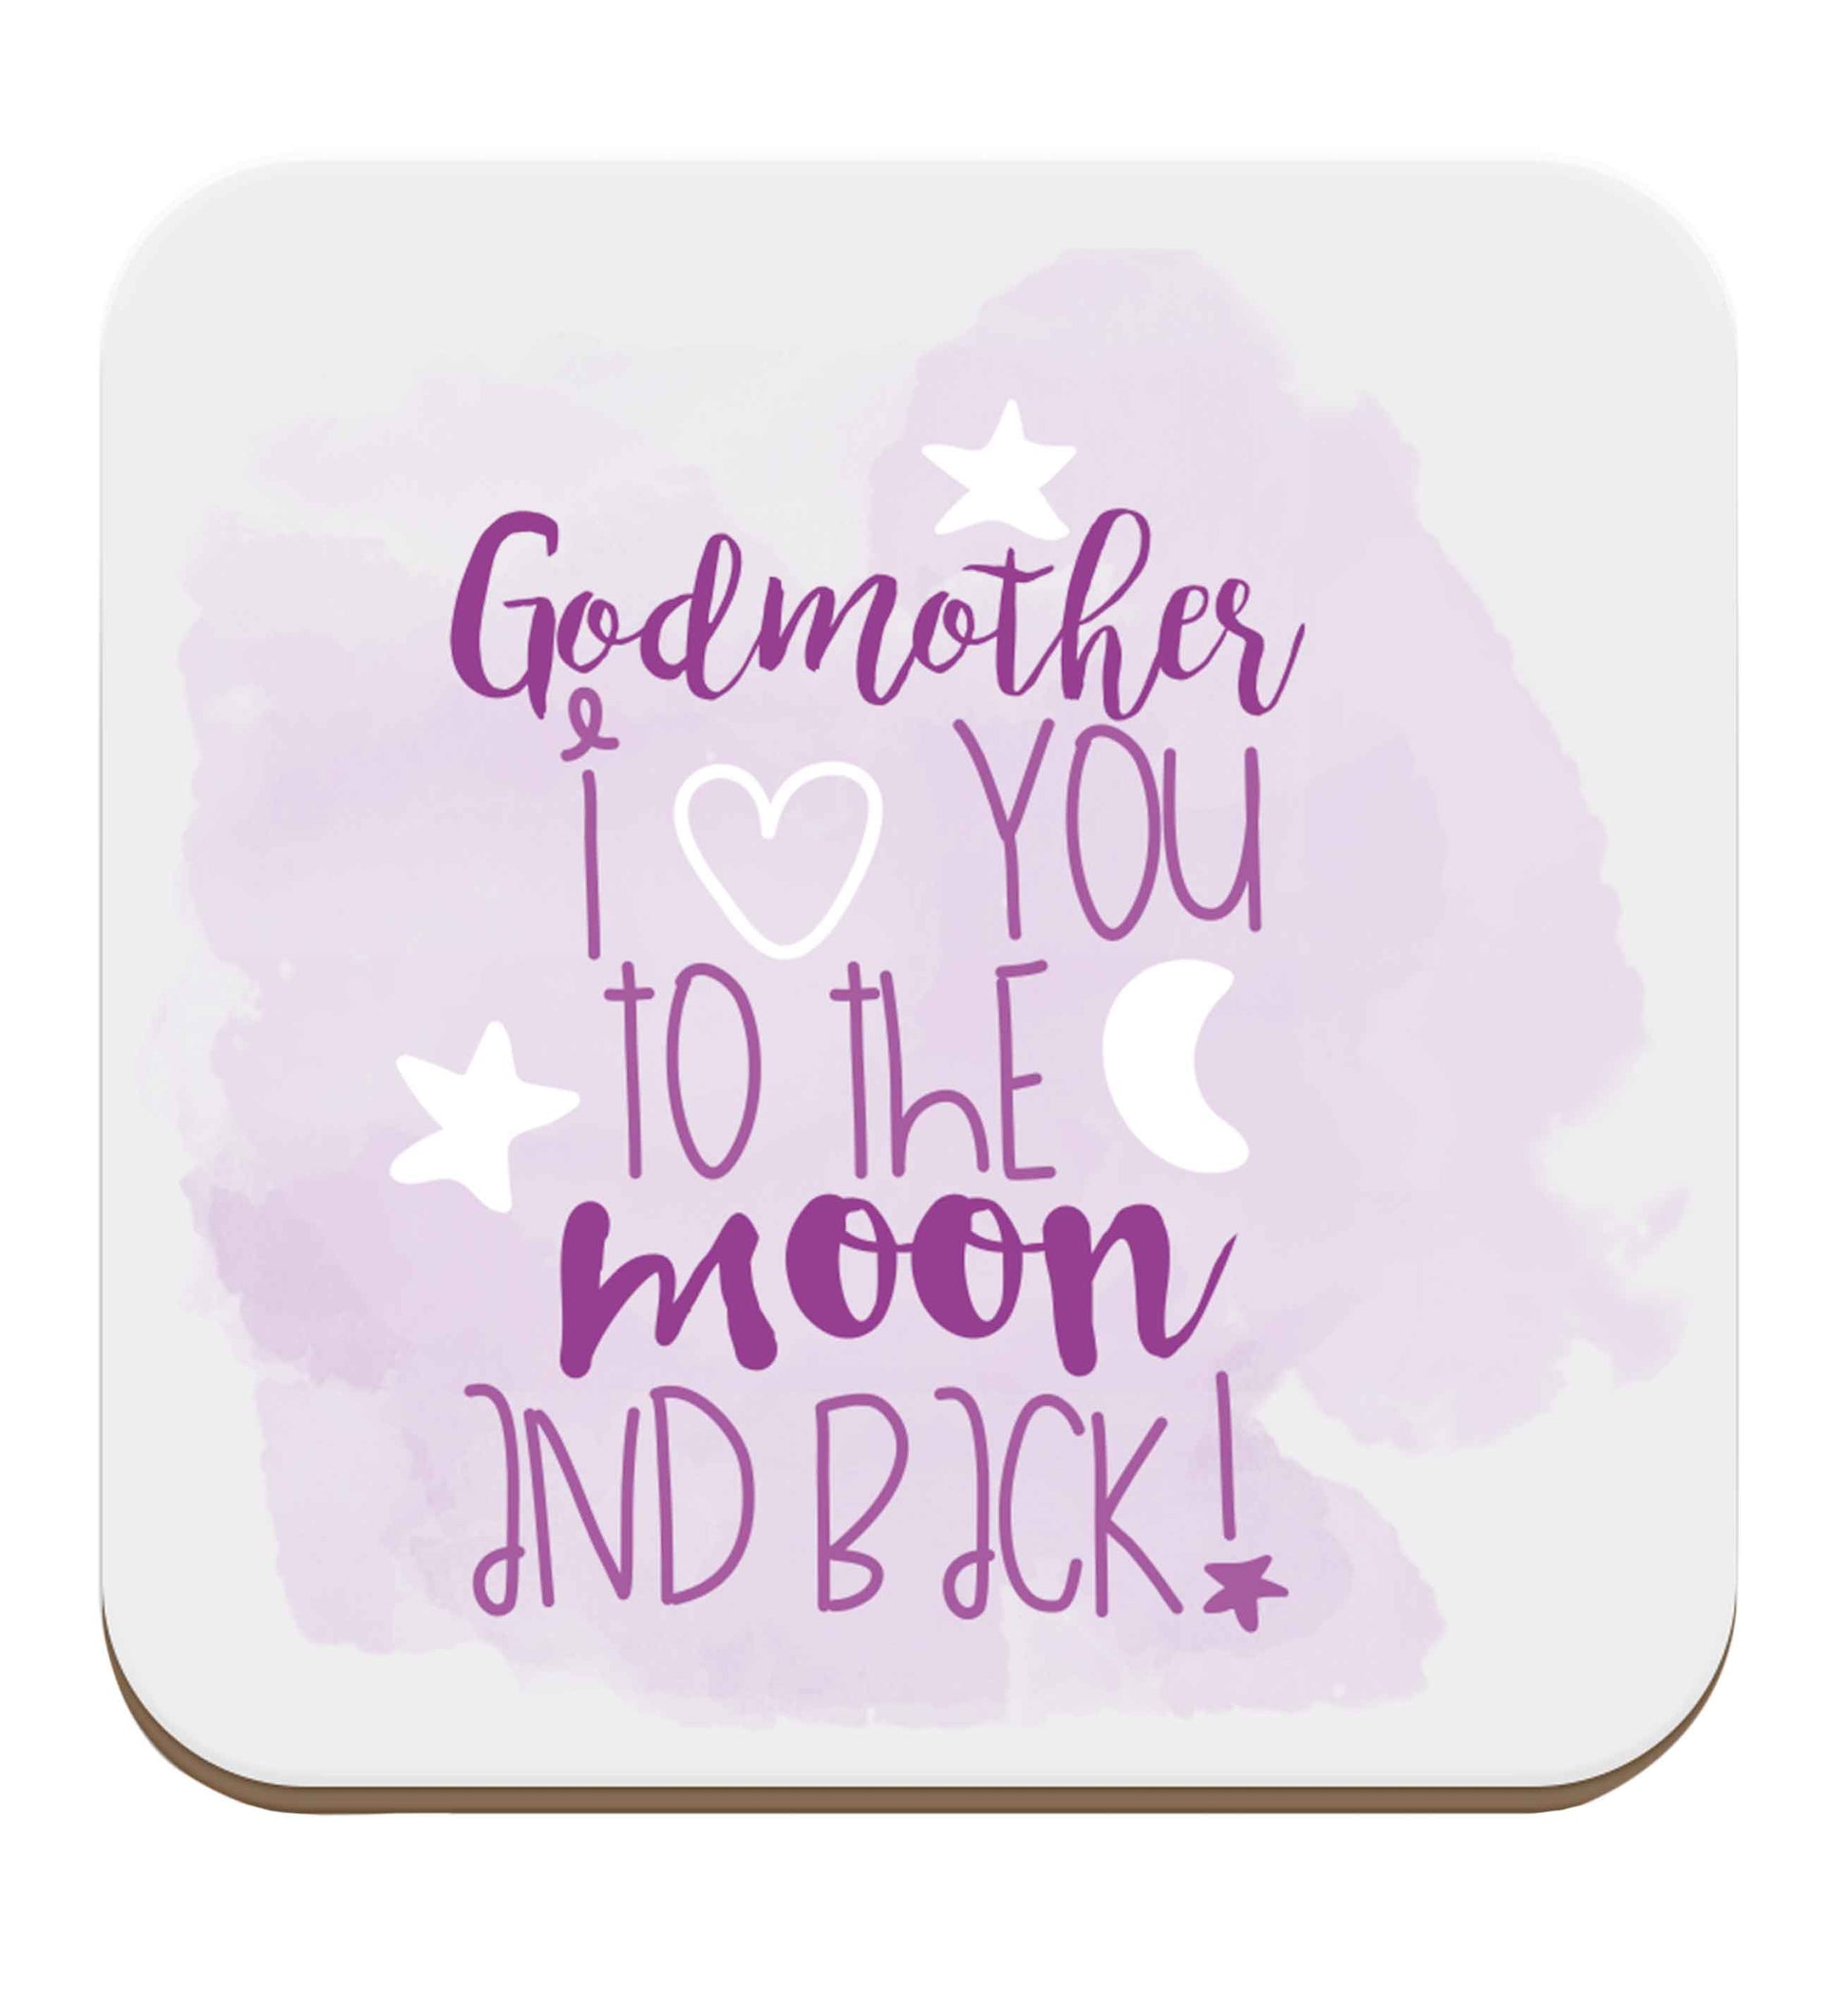 Godmother I love you to the moon and back set of four coasters